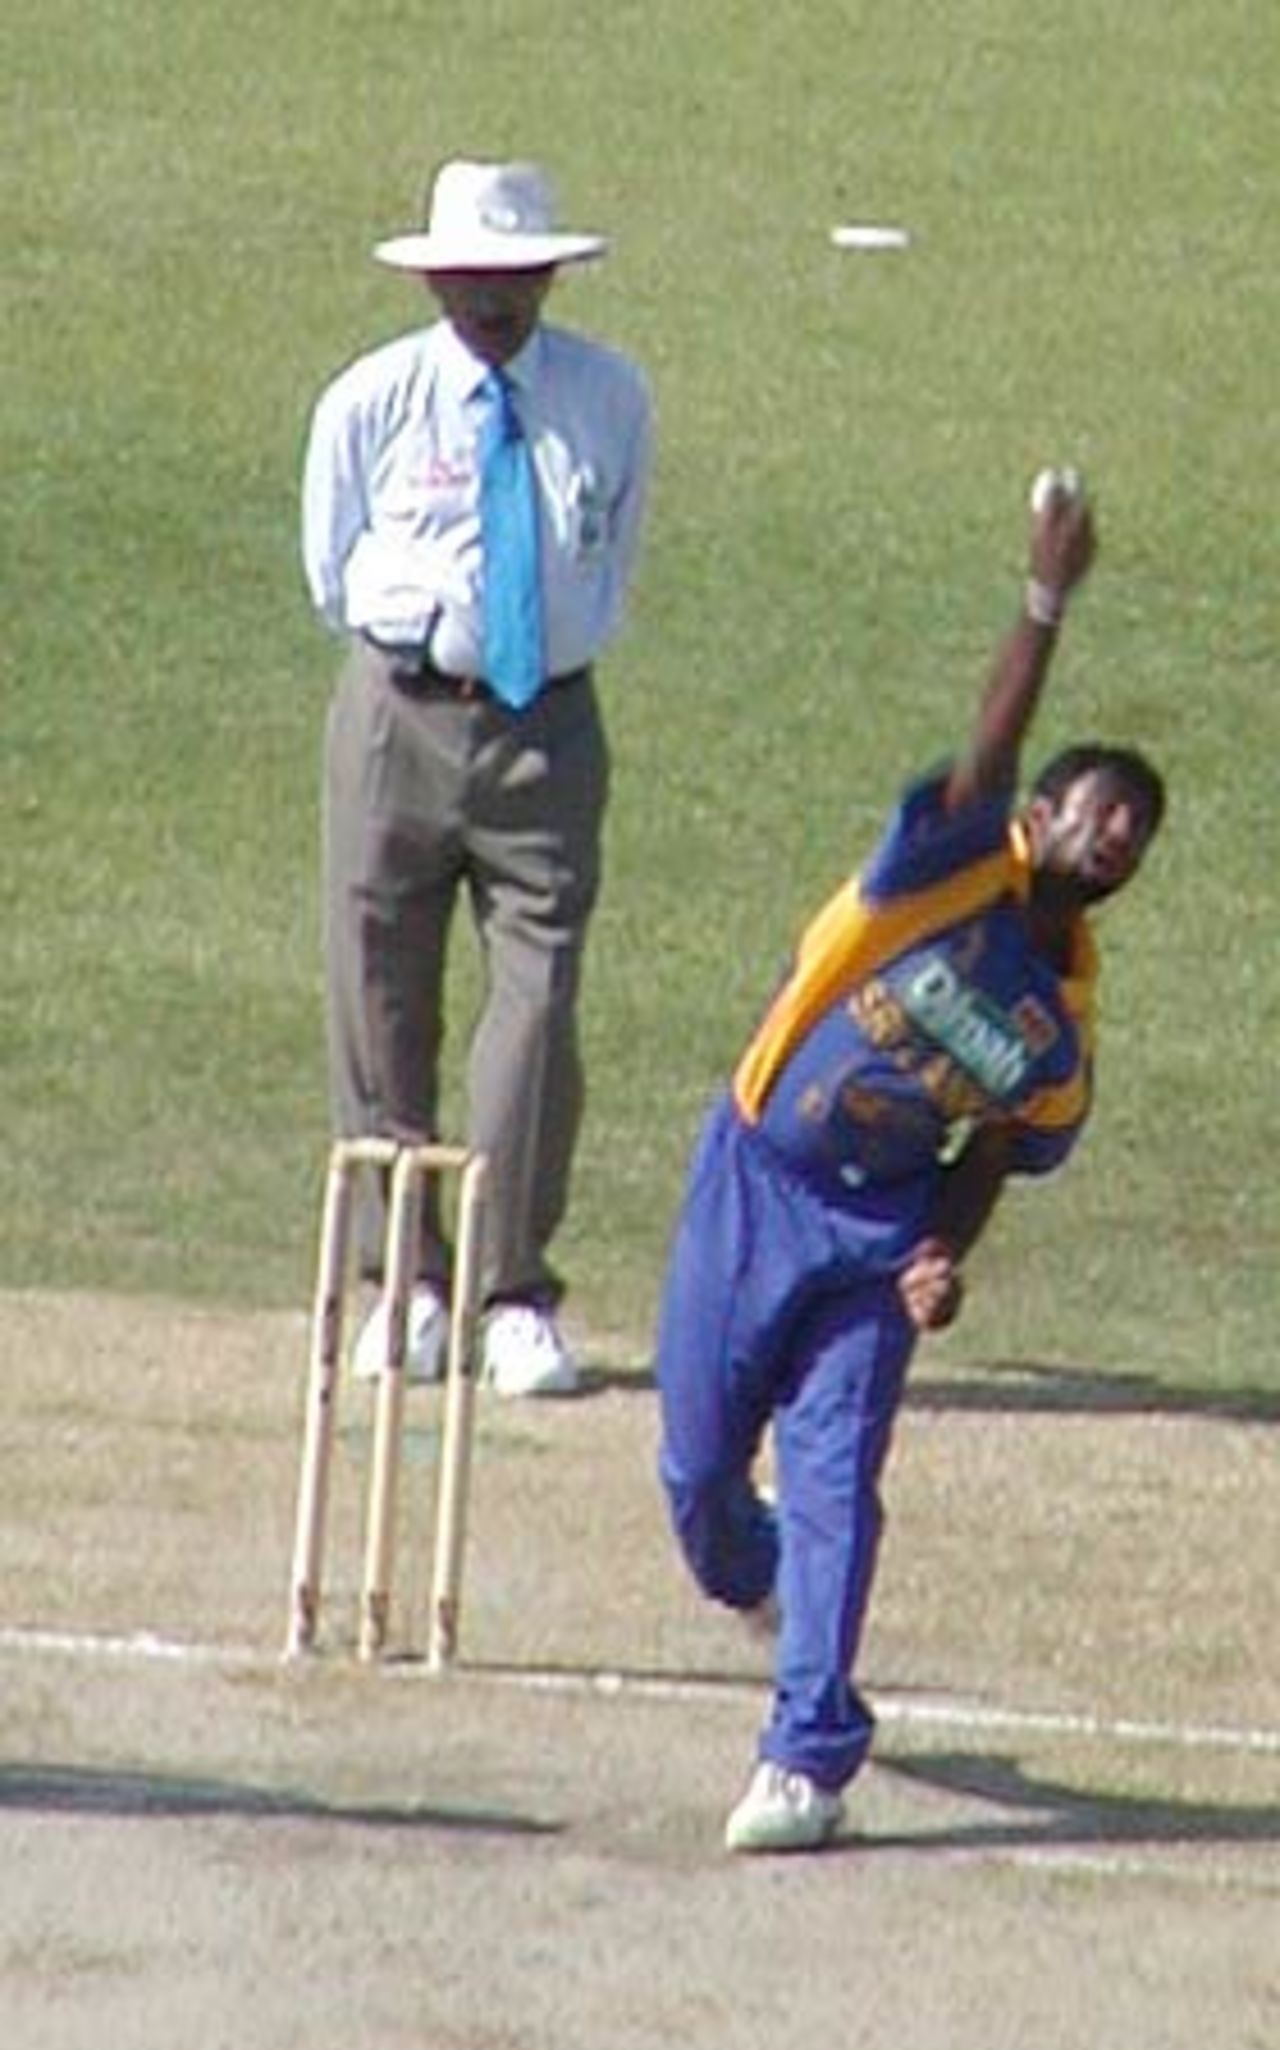 Muralitharan bowling his 'special' one!, Morocco Cup, 4th ODI at Tangiers, Pakistan v Sri Lanka, 17 Aug 2002